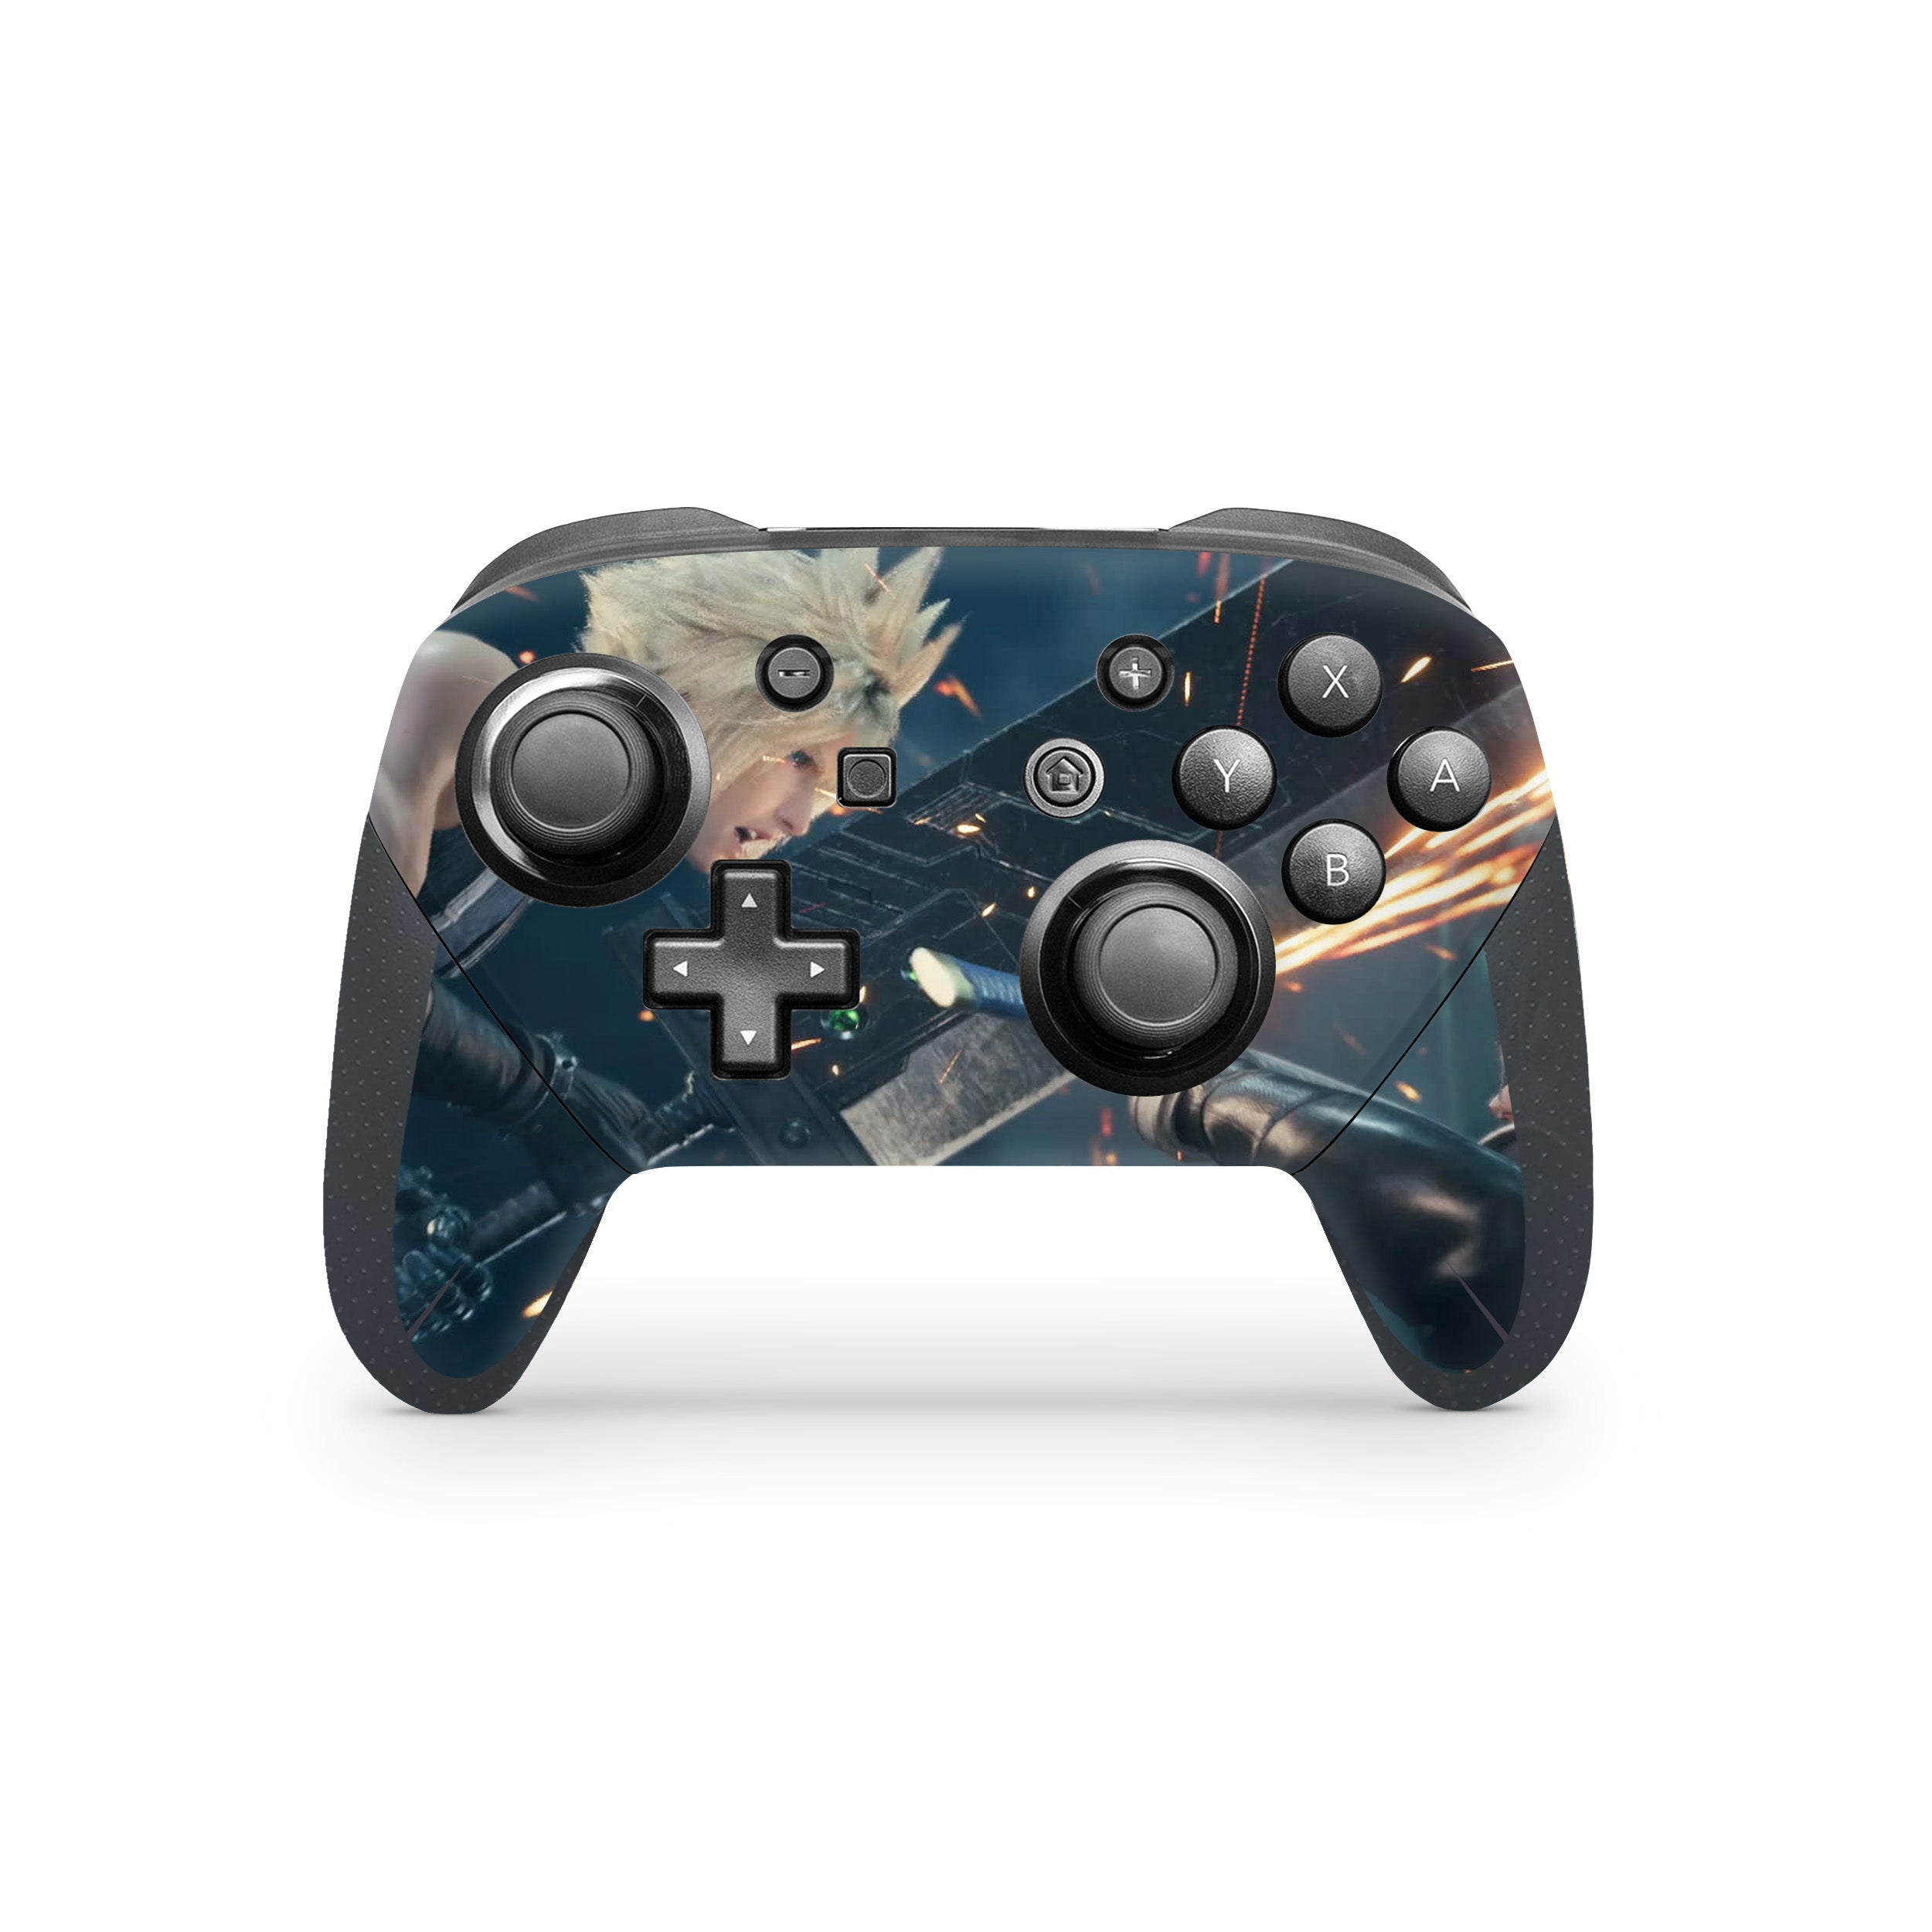 A video game skin featuring a Final Fantasy 7 Cloud vs Sephiroth design for the Switch Pro Controller.